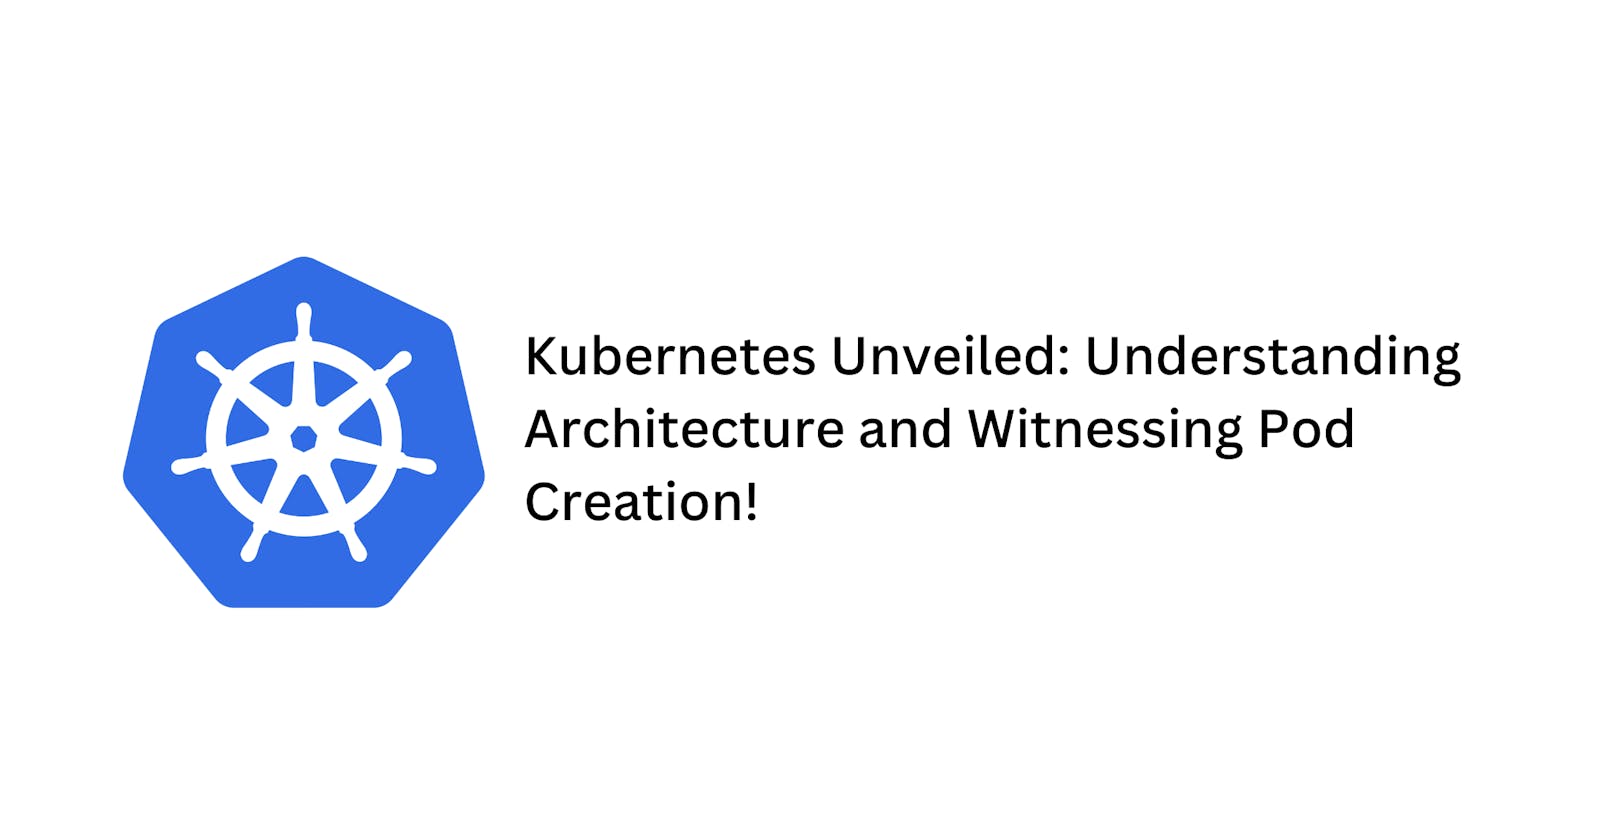 Kubernetes Unveiled: Understanding Architecture and Witnessing Pod Creation!